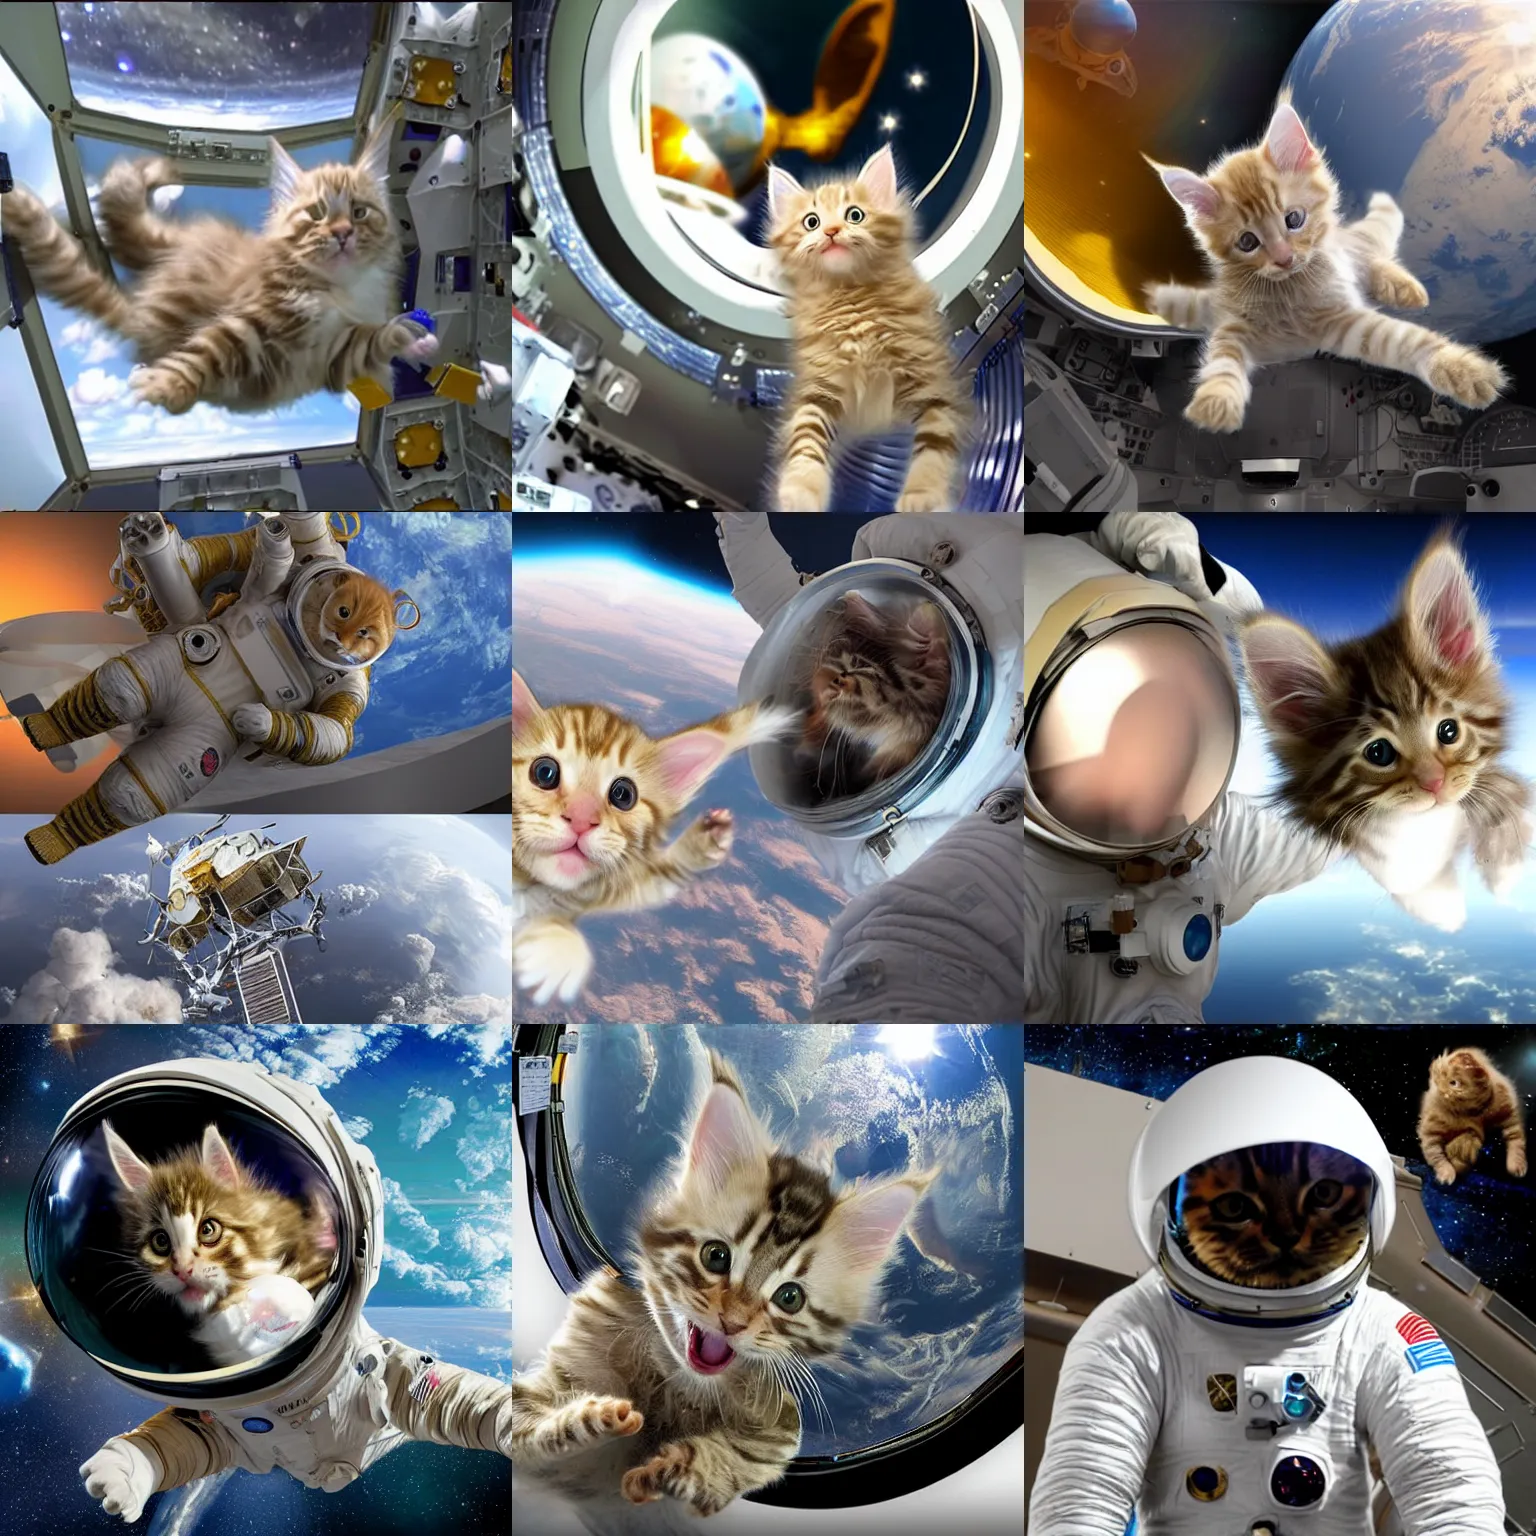 Prompt: 3D realistic action sequence of an astronaut ((cream colored maine coon kitten)) in a spacesuit floating in space at the James Webb Telescope, alien spacecraft friendly cute cute cute in the background